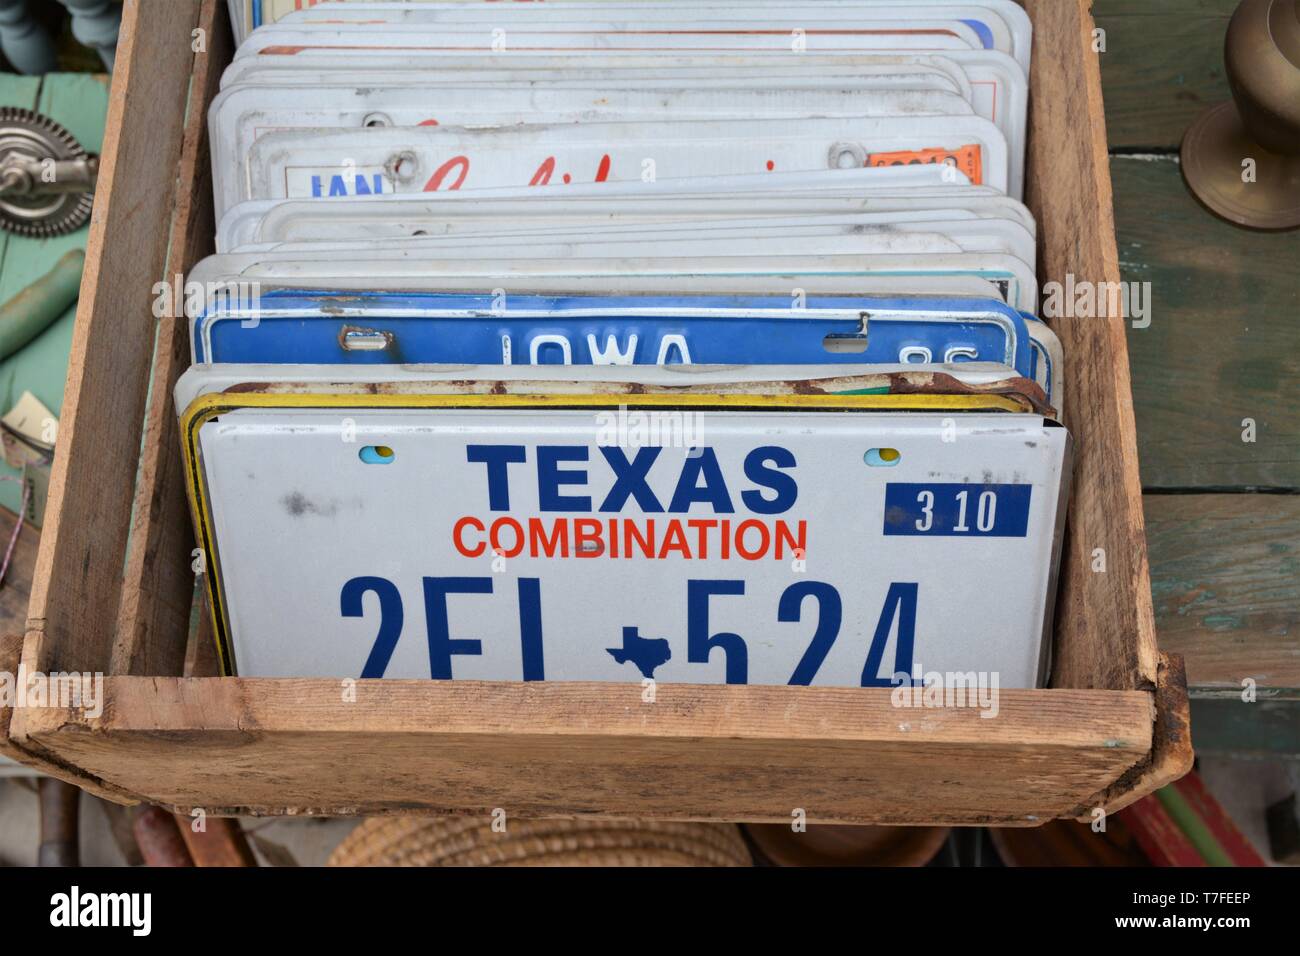 Licenses from Texas for cars as decoration Stock Photo